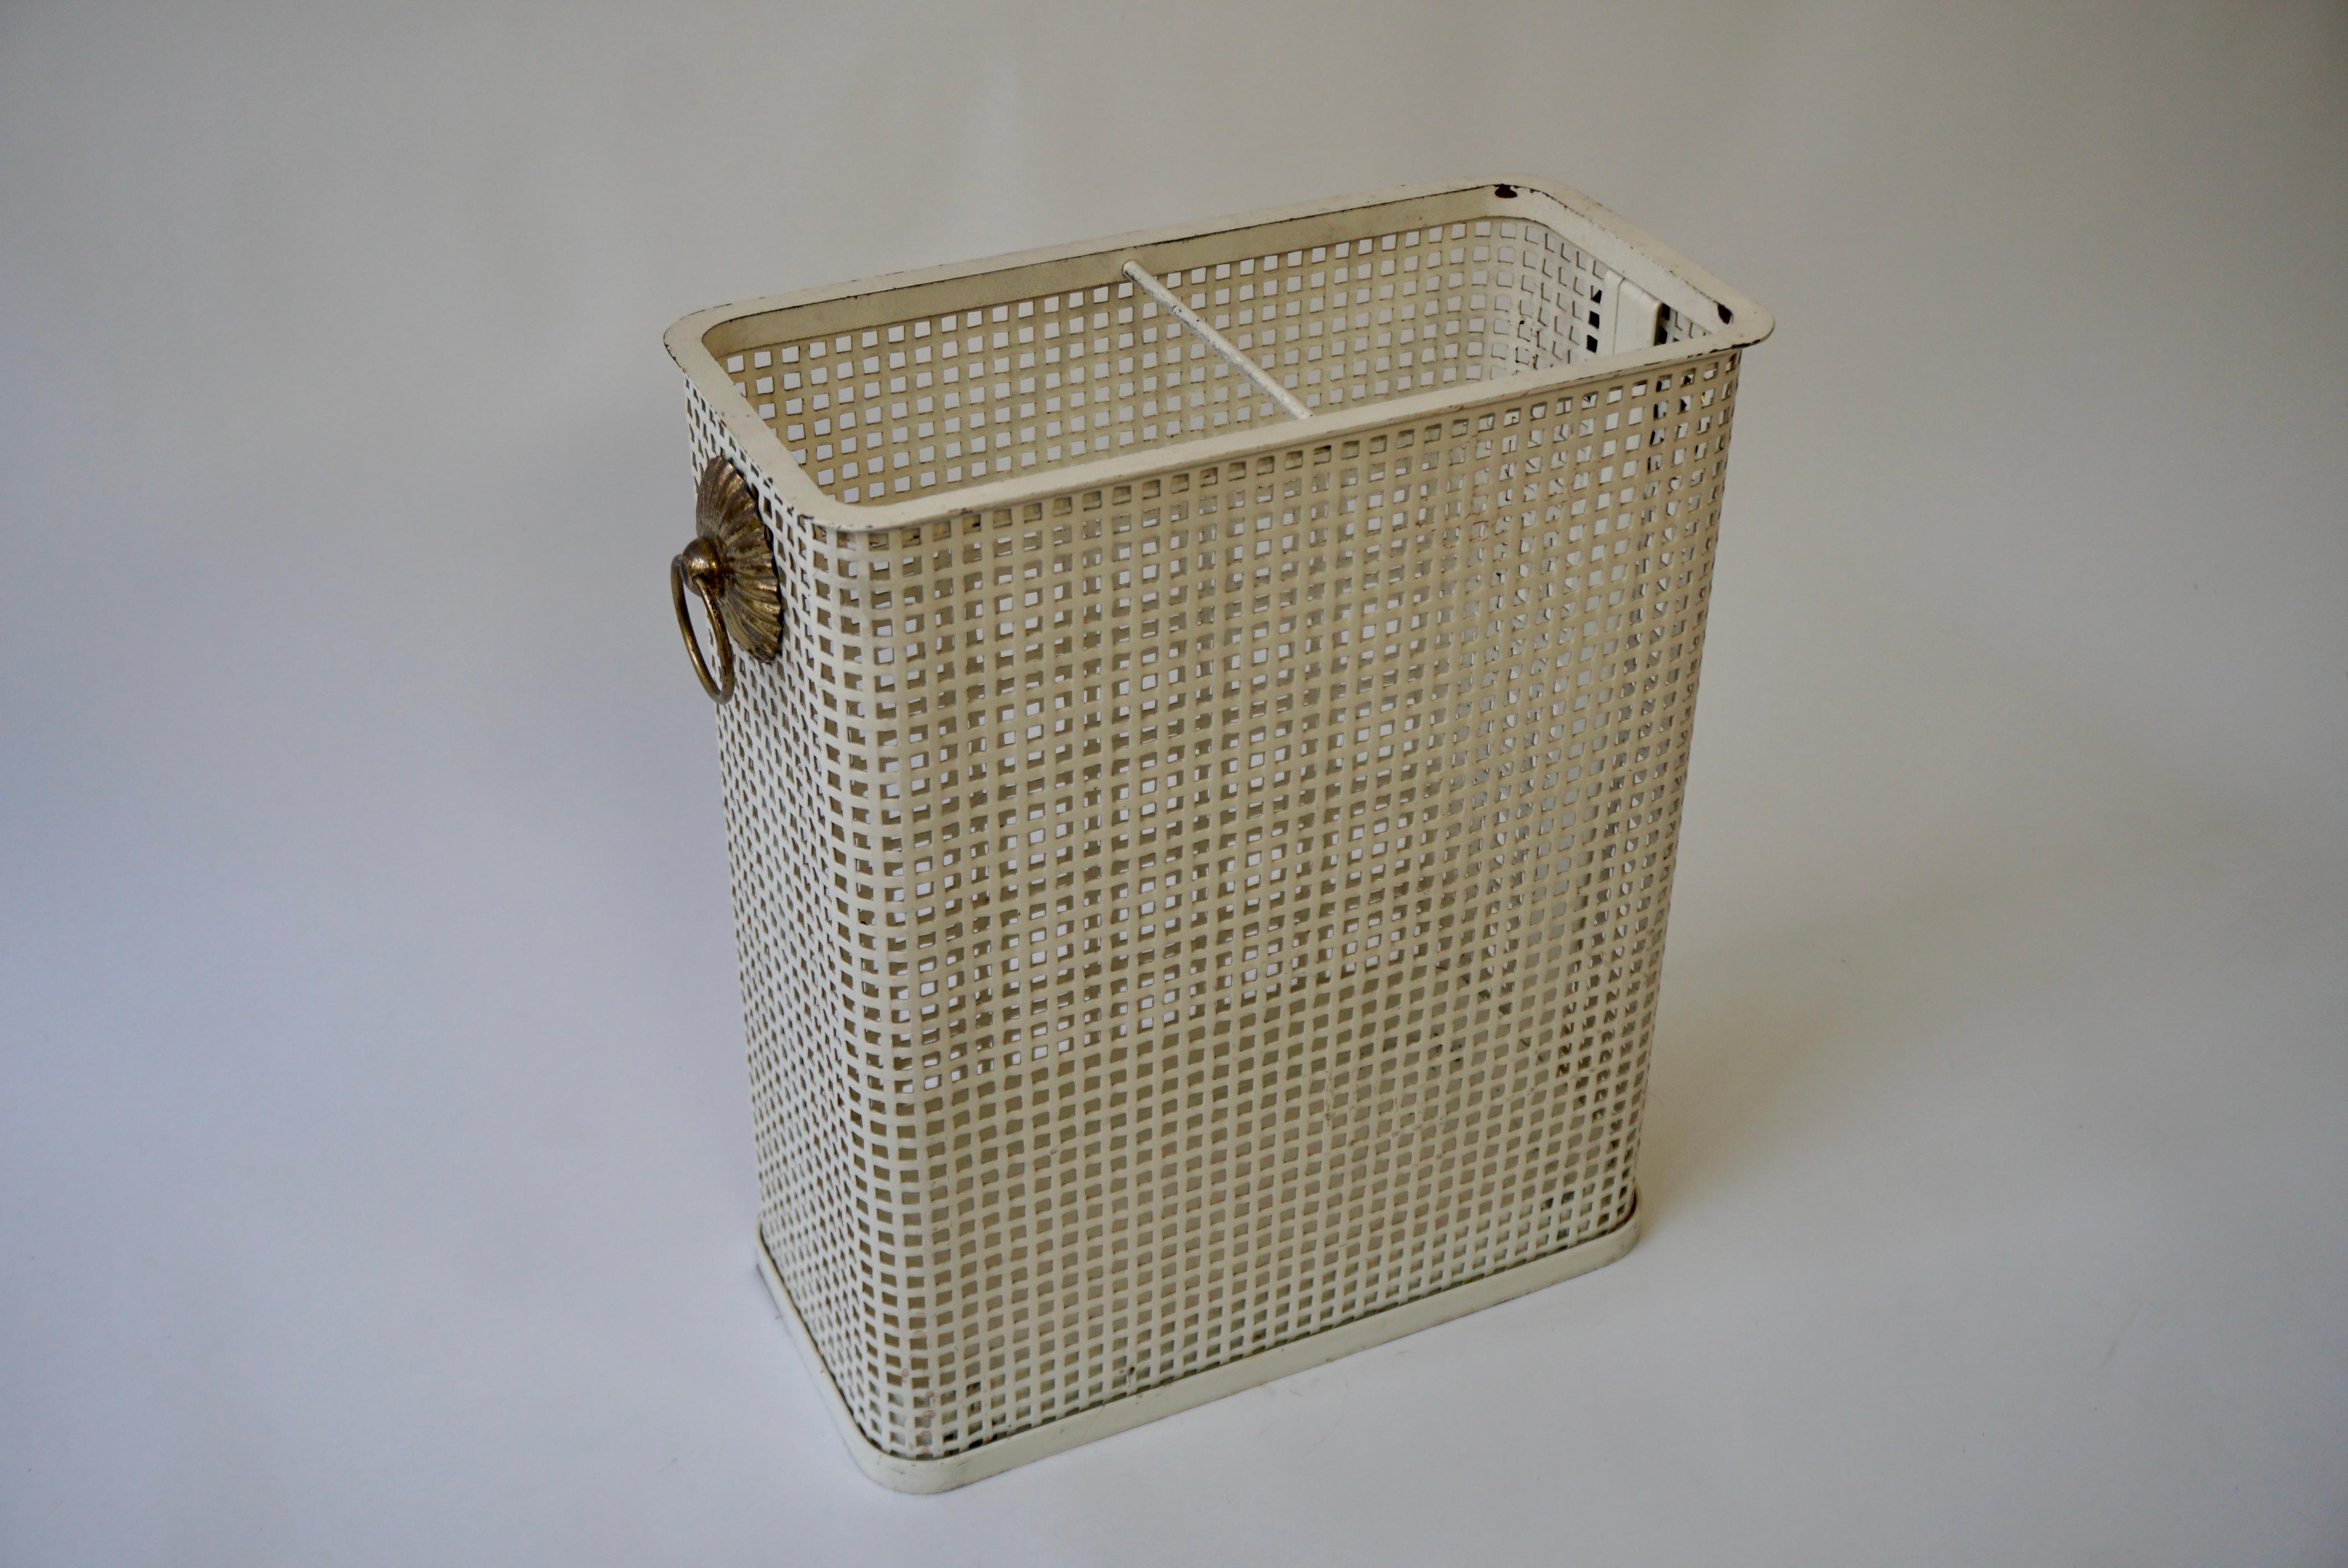 Umbrella holder or basket in a rectangular shape, in openwork metal of ivory color with a brass handle. It is in perforated white metal in the style of designer Josef Hoffmann. Time-worn patina.